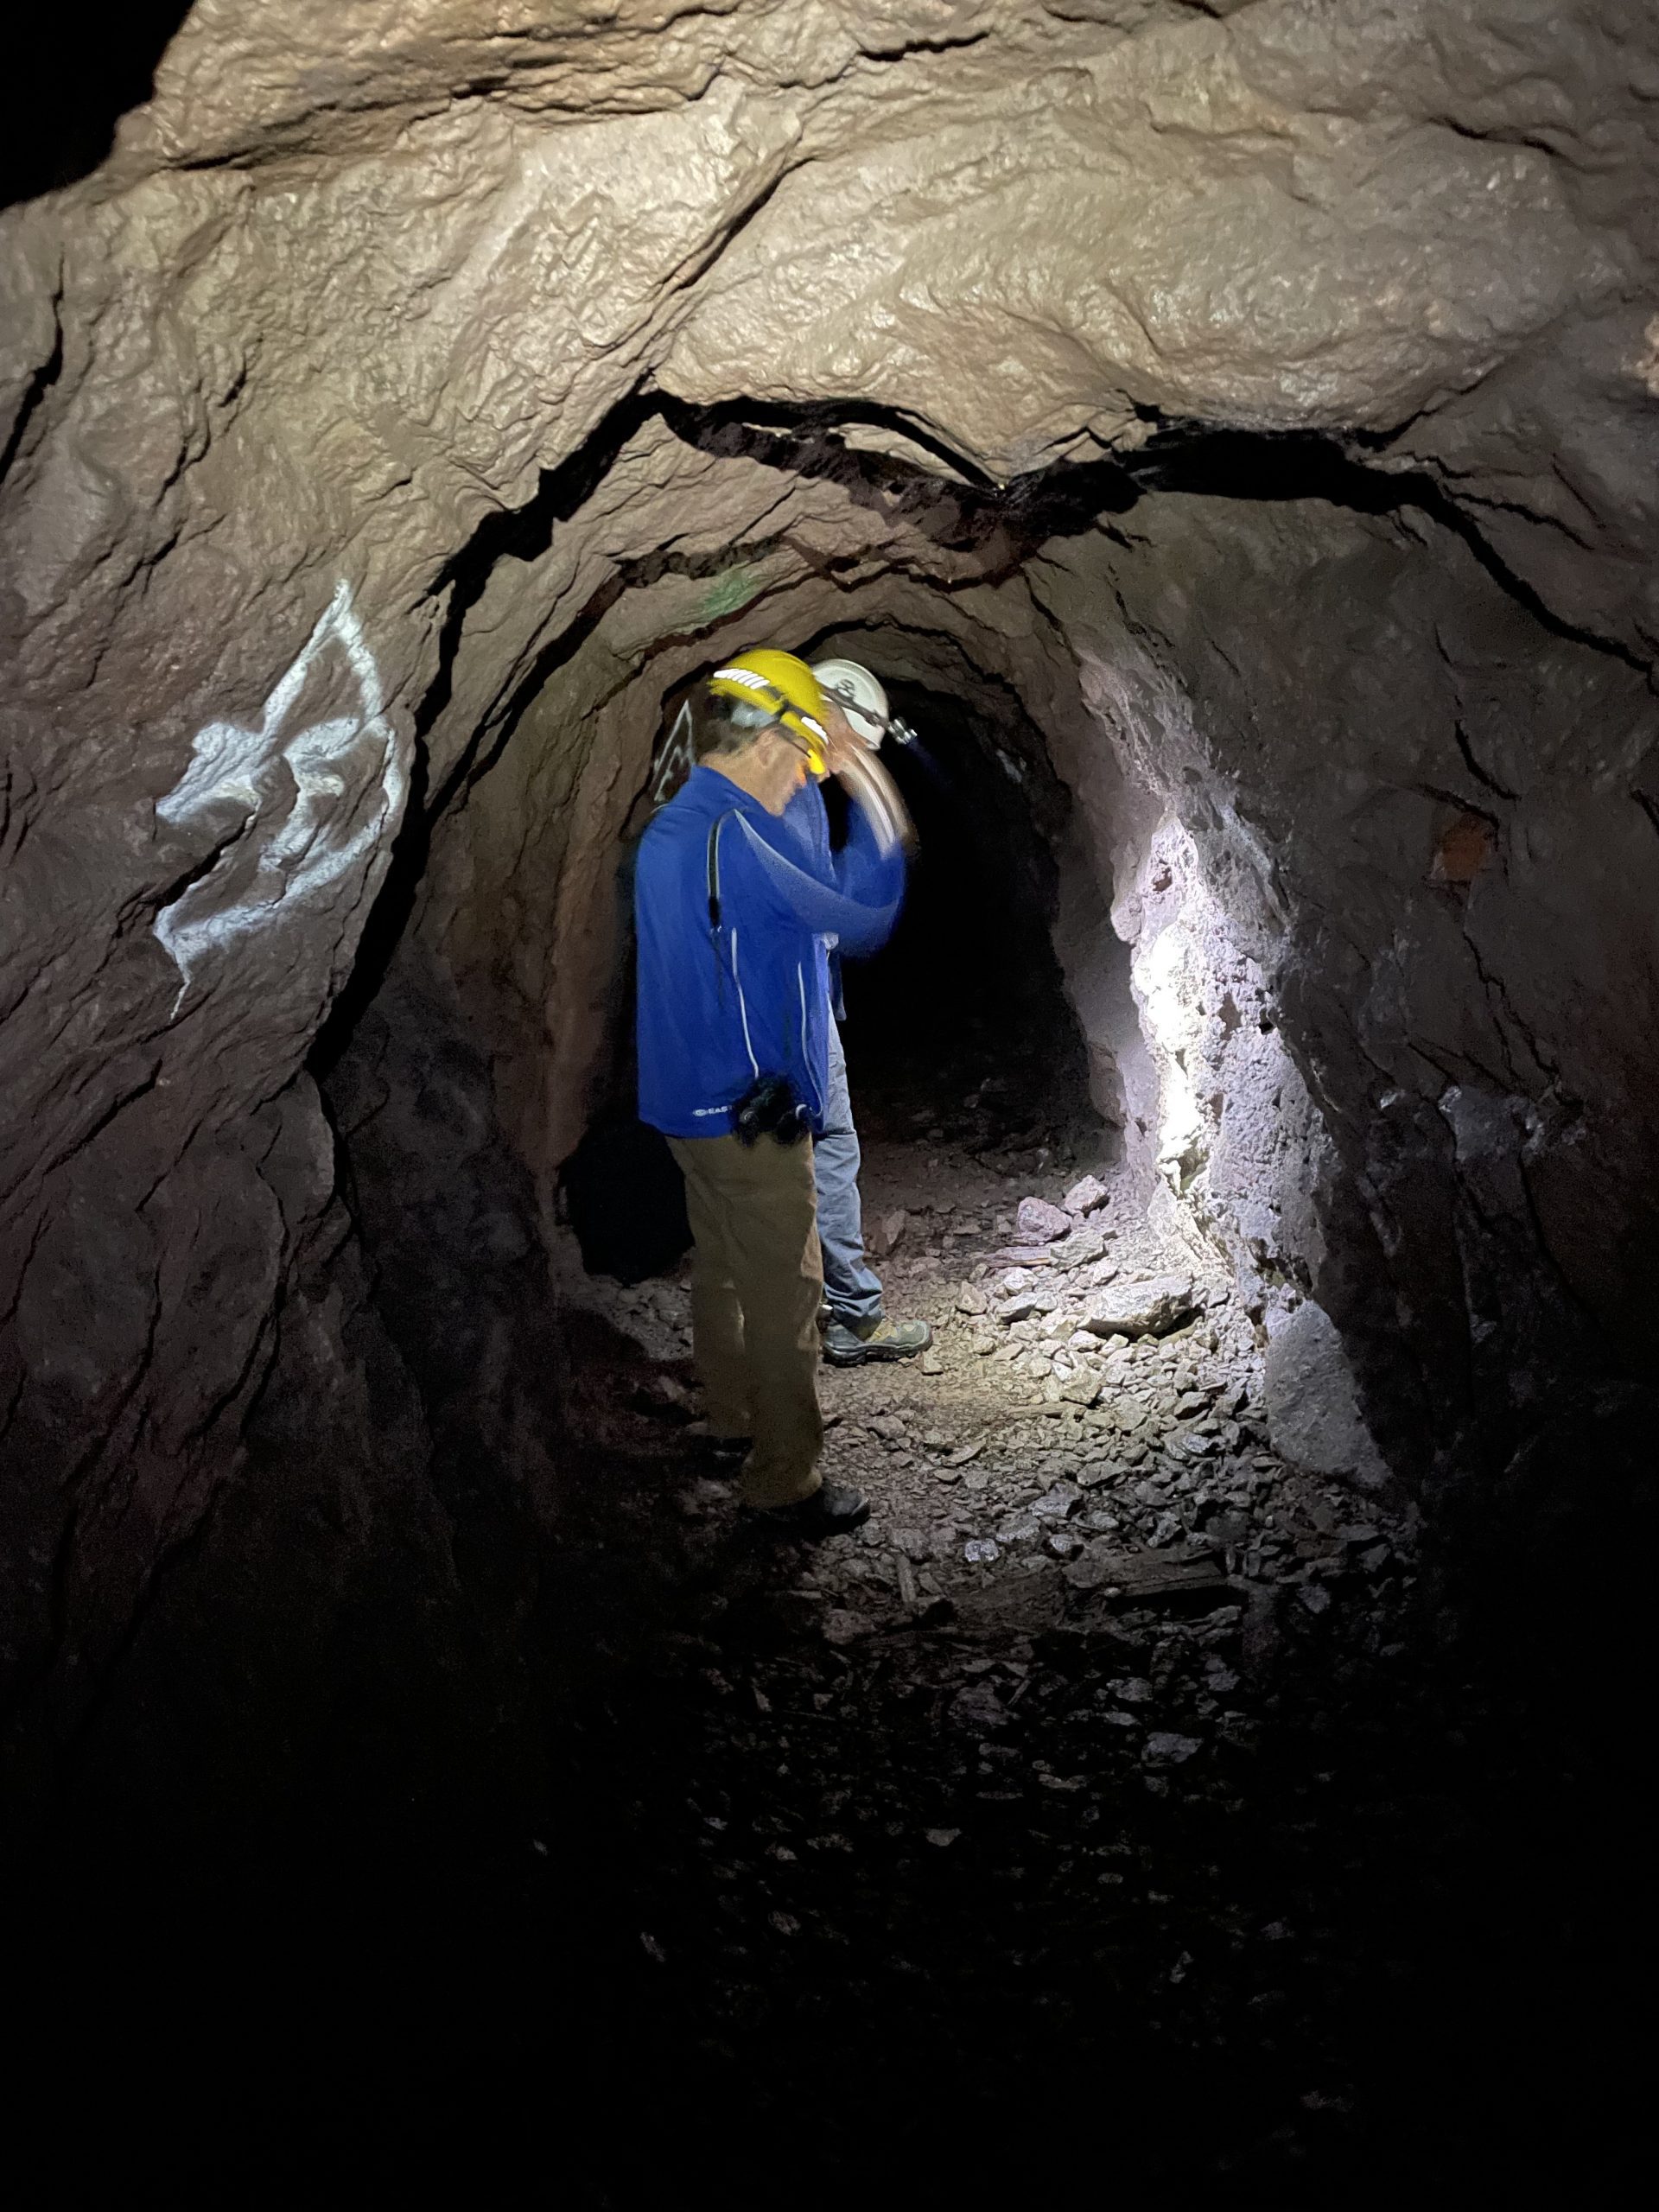 Prof. Steve Smith is pictured here several hundred feet underground at the Quincy Mine, once the biggest copper mining company in America.